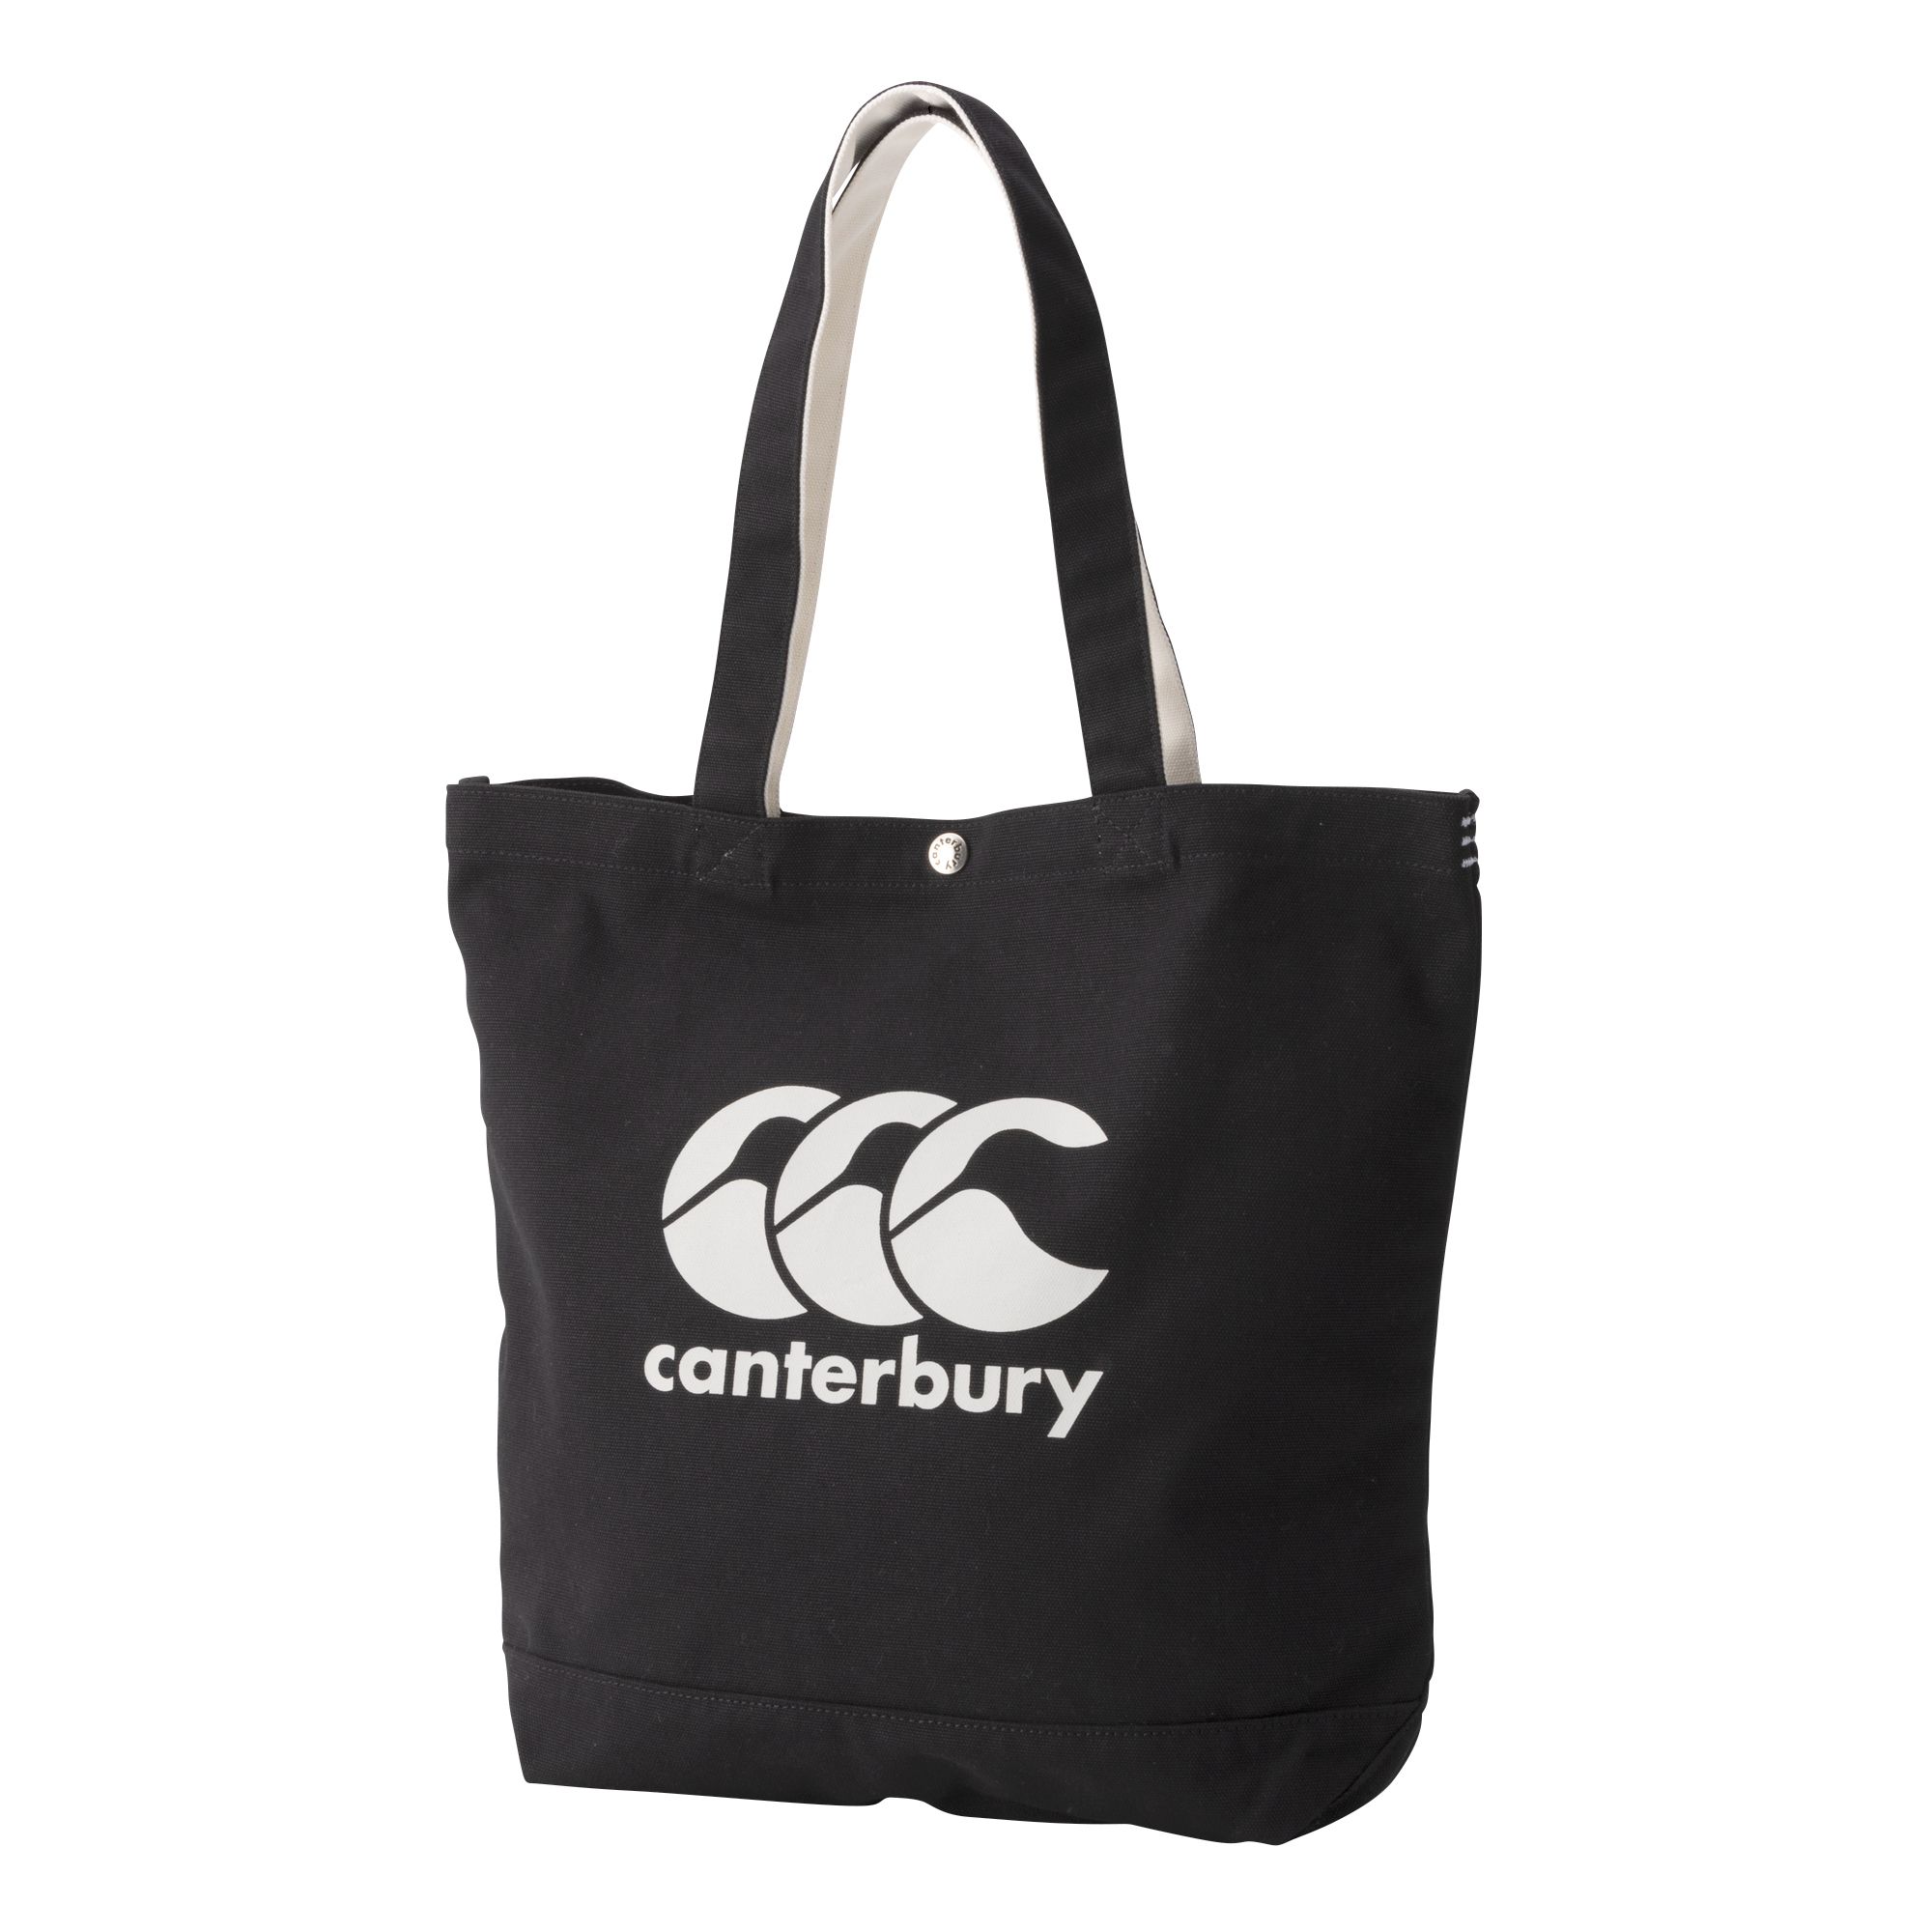 RUGBY PRO SHOP Ryu / カンタベリー キャンバス トートバッグ